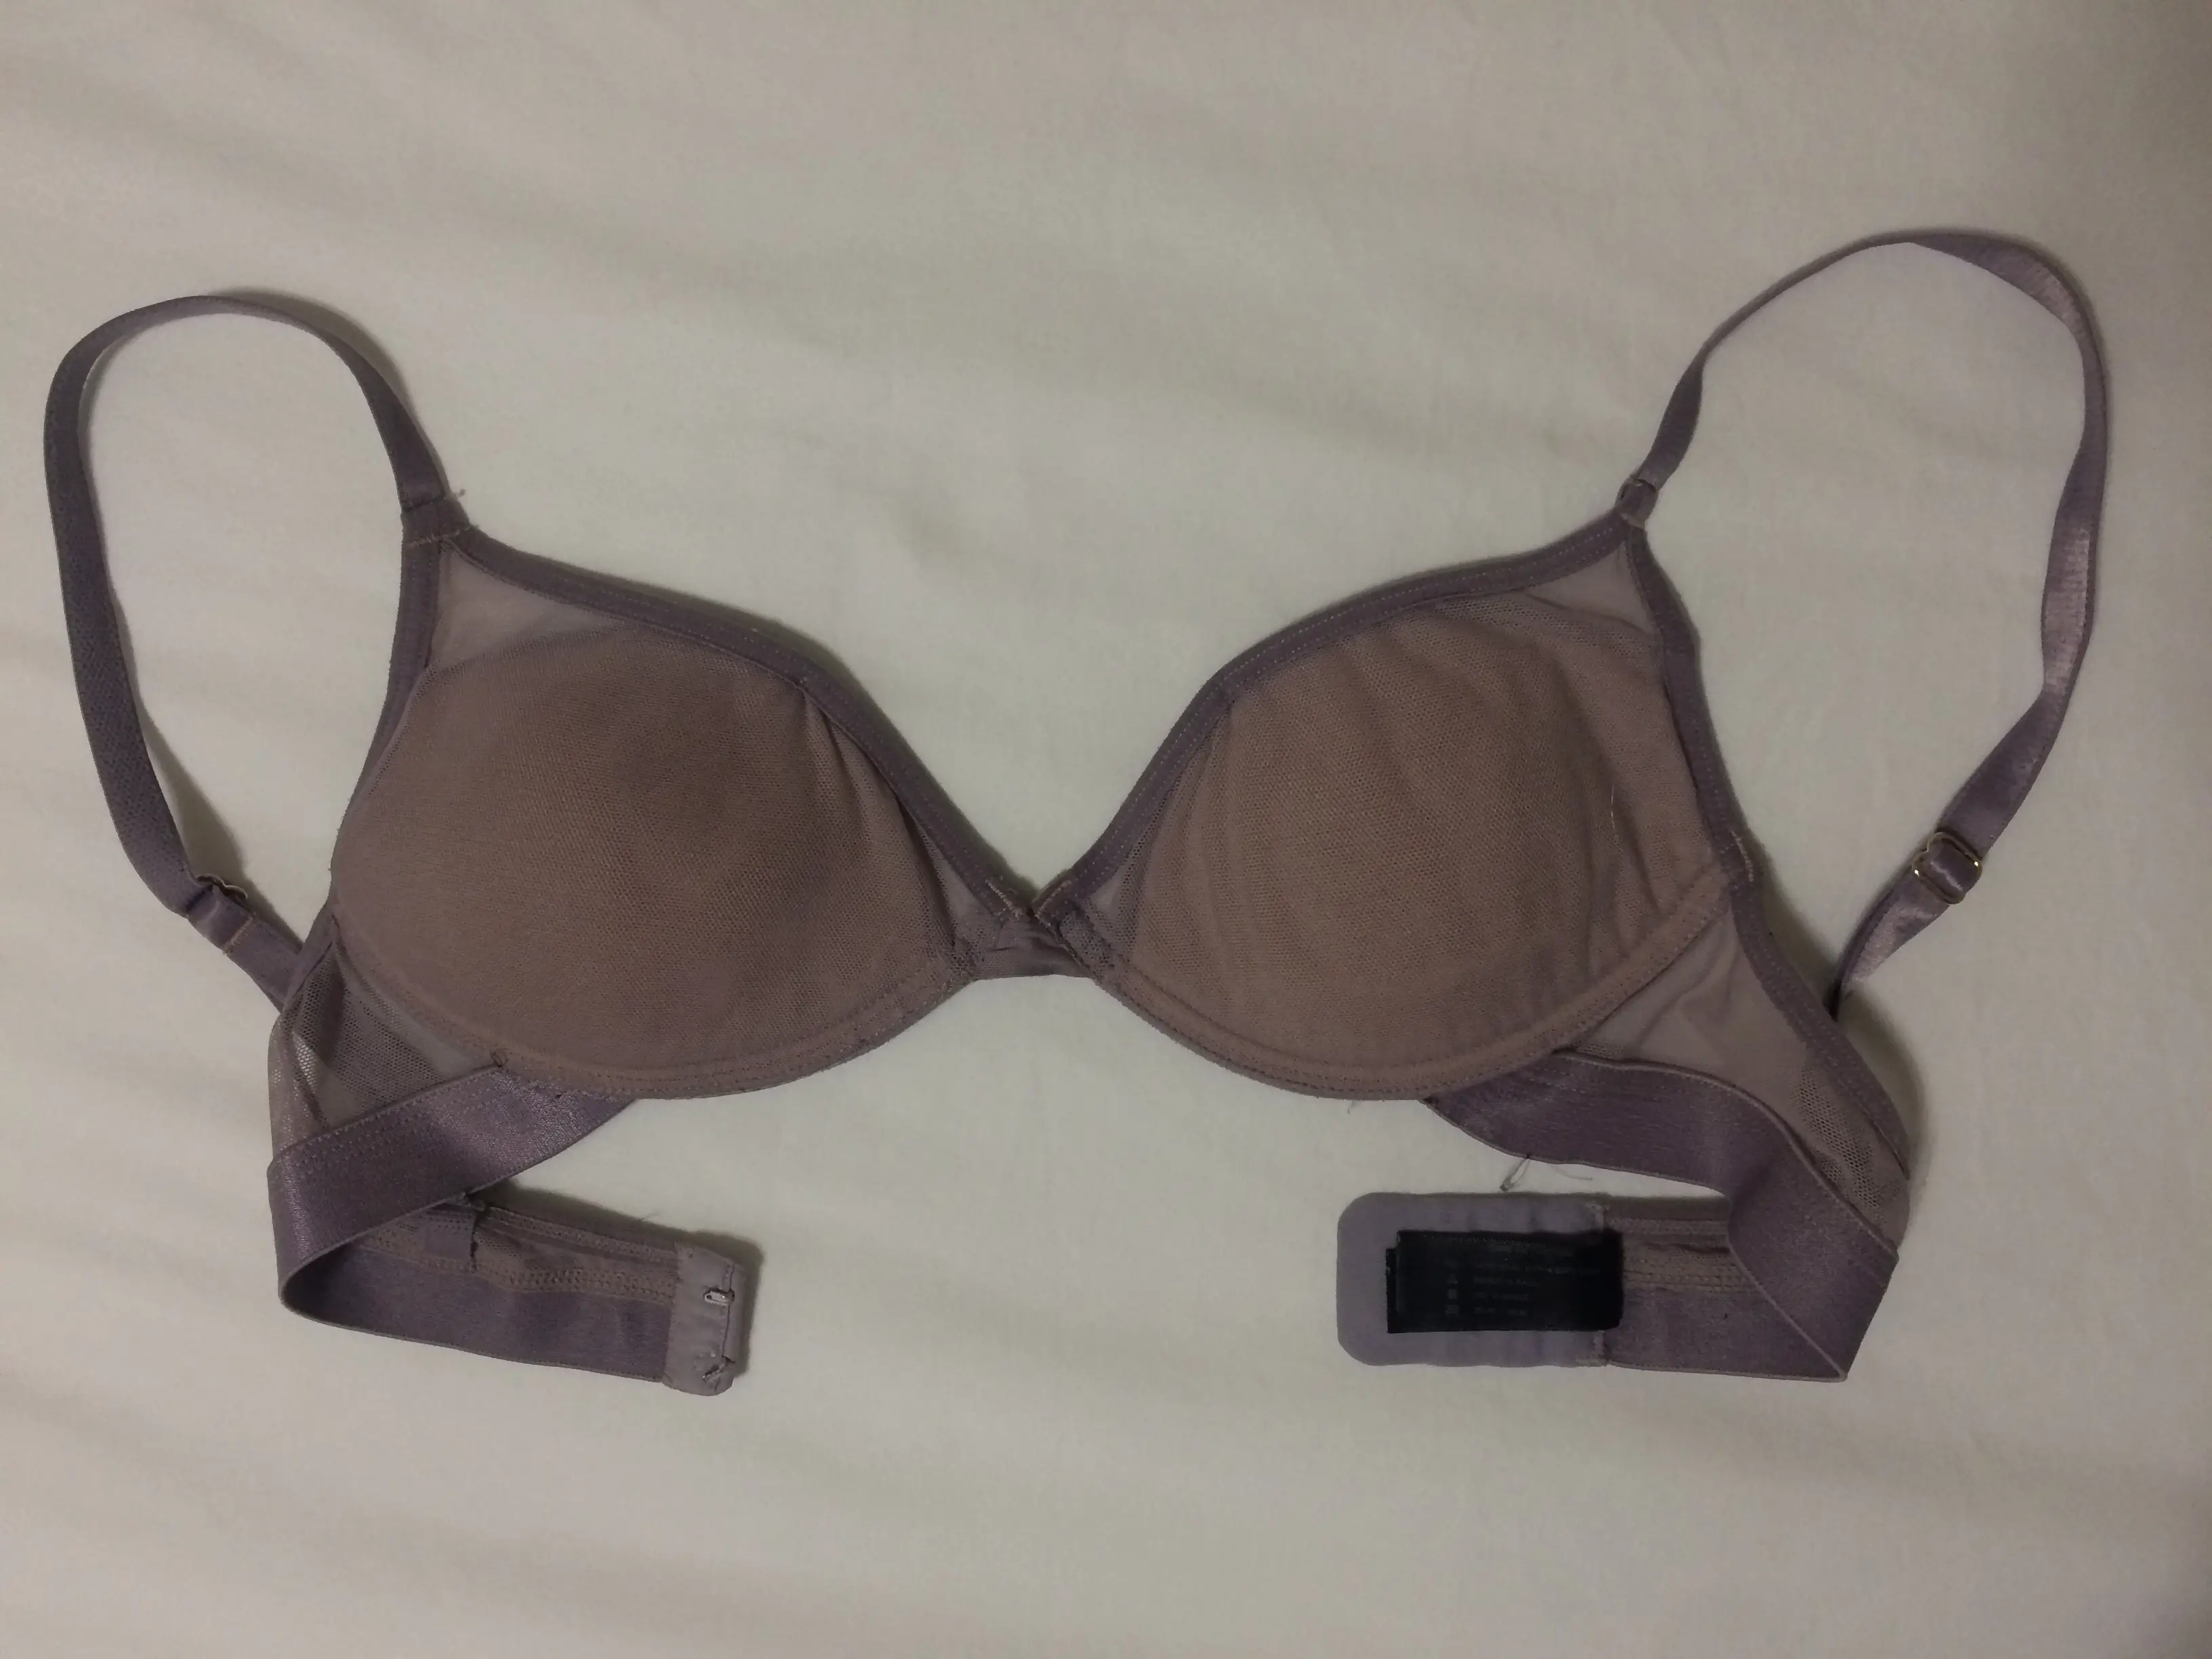 Pepper Review Is This The Best Bra For Small Busts Advice For Millennials